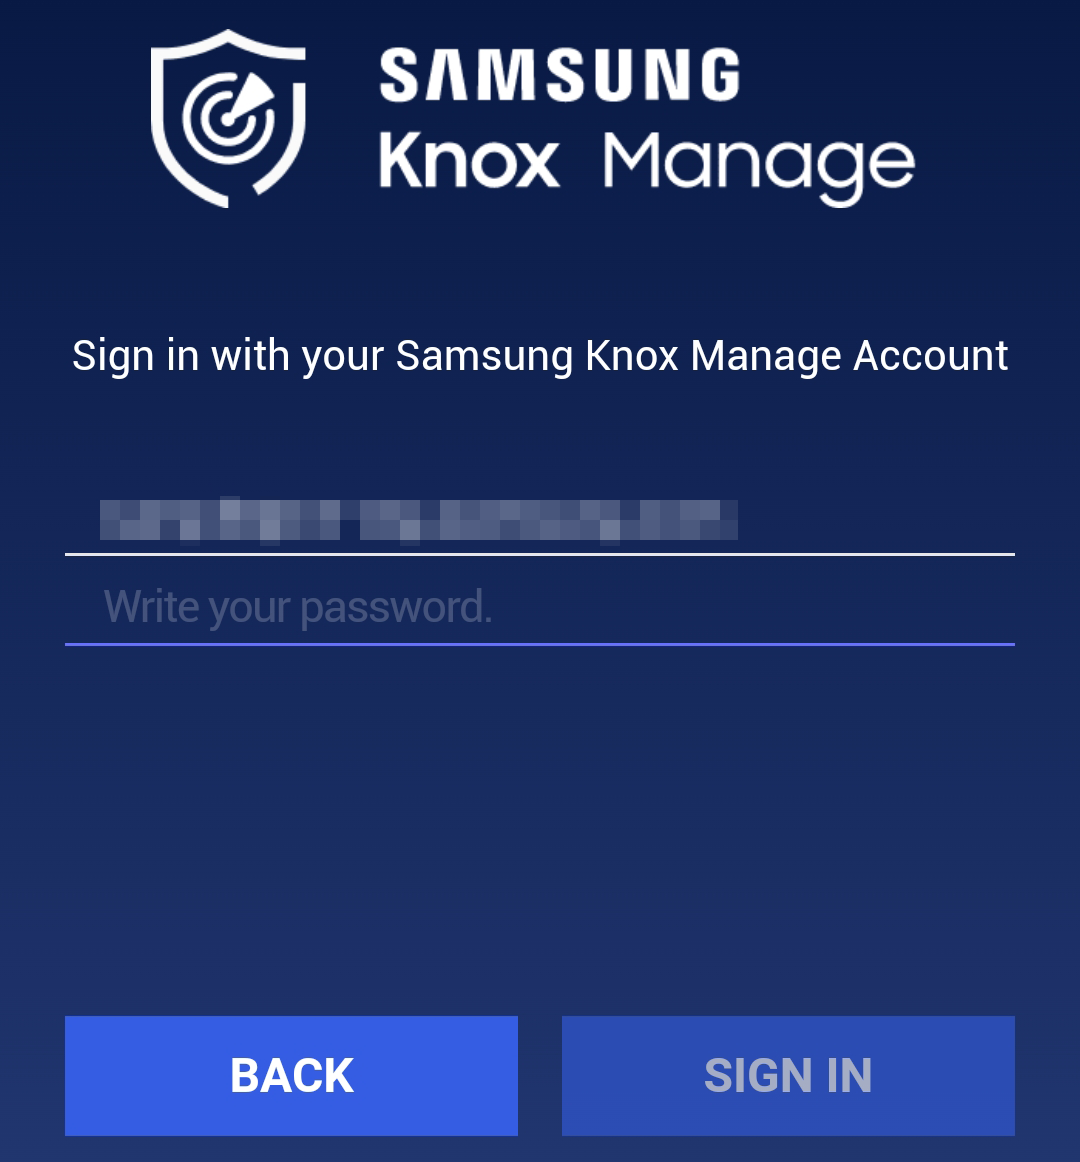 Samsung Knox Manage sign in screen